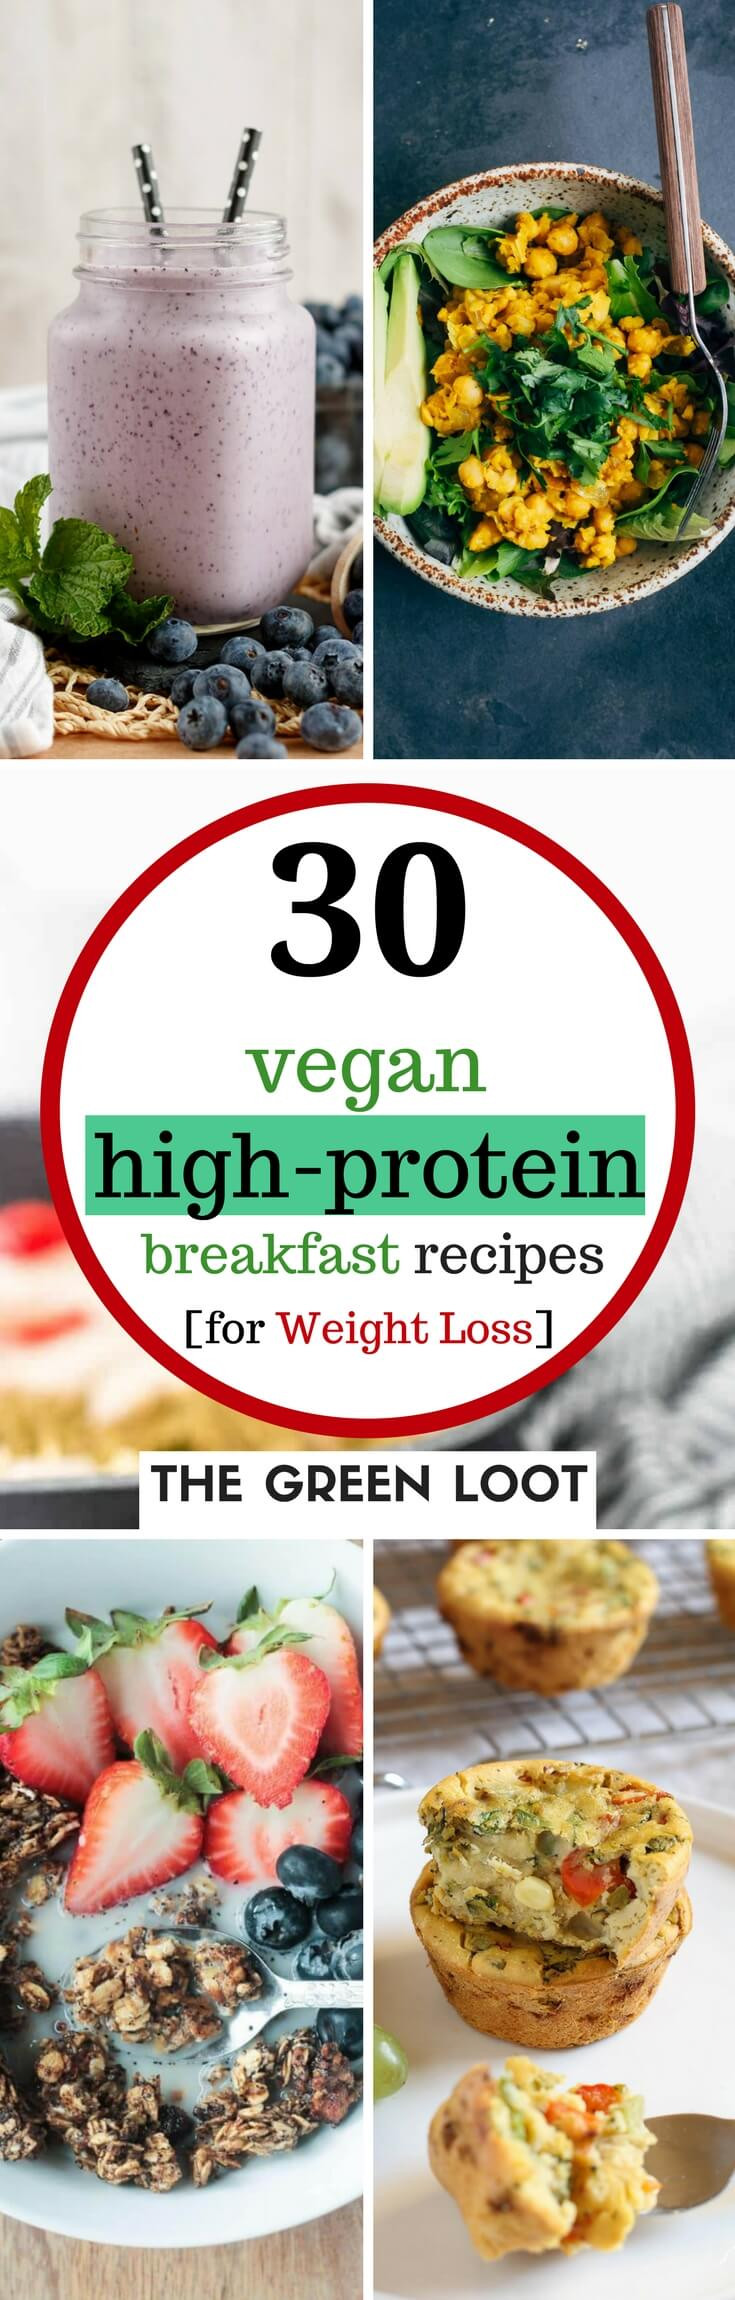 High Protein Breakfast Recipes For Weight Loss
 Vegan High Protein Breakfast Recipes for Weight Loss